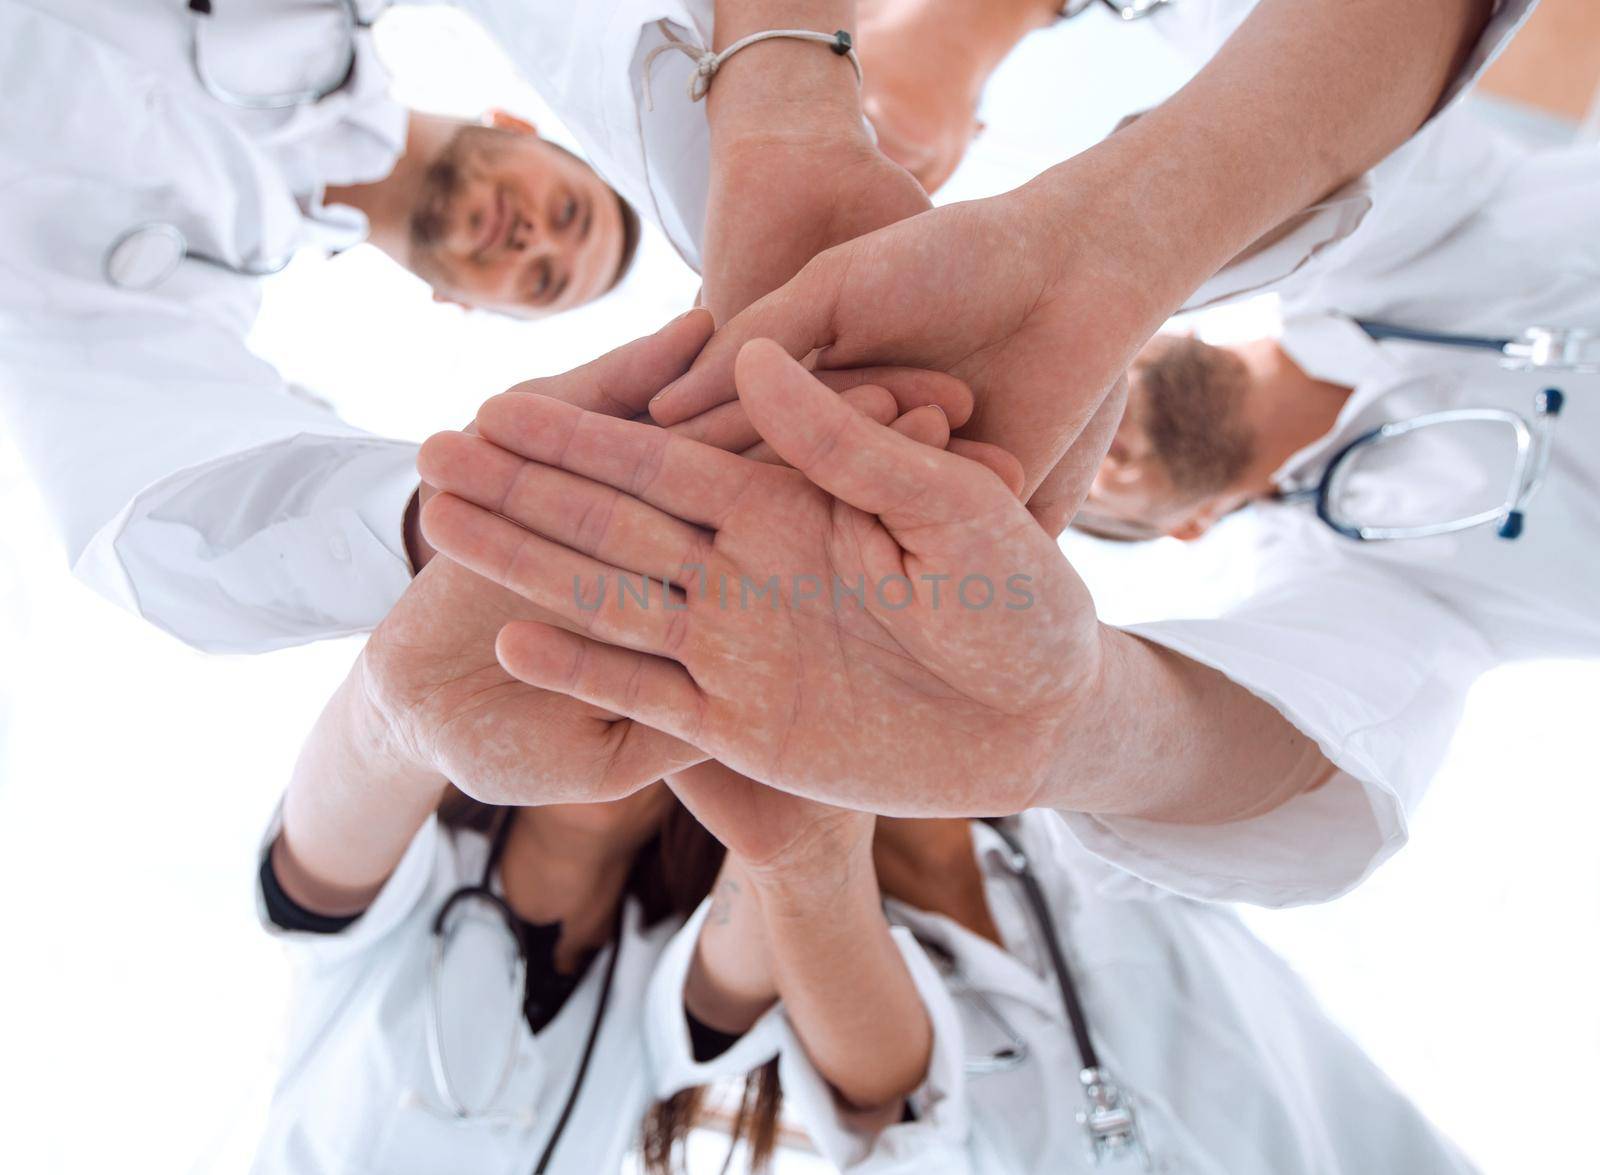 bottom view. image of a group of diverse medical staff showing their unity. concept of mutual aid.